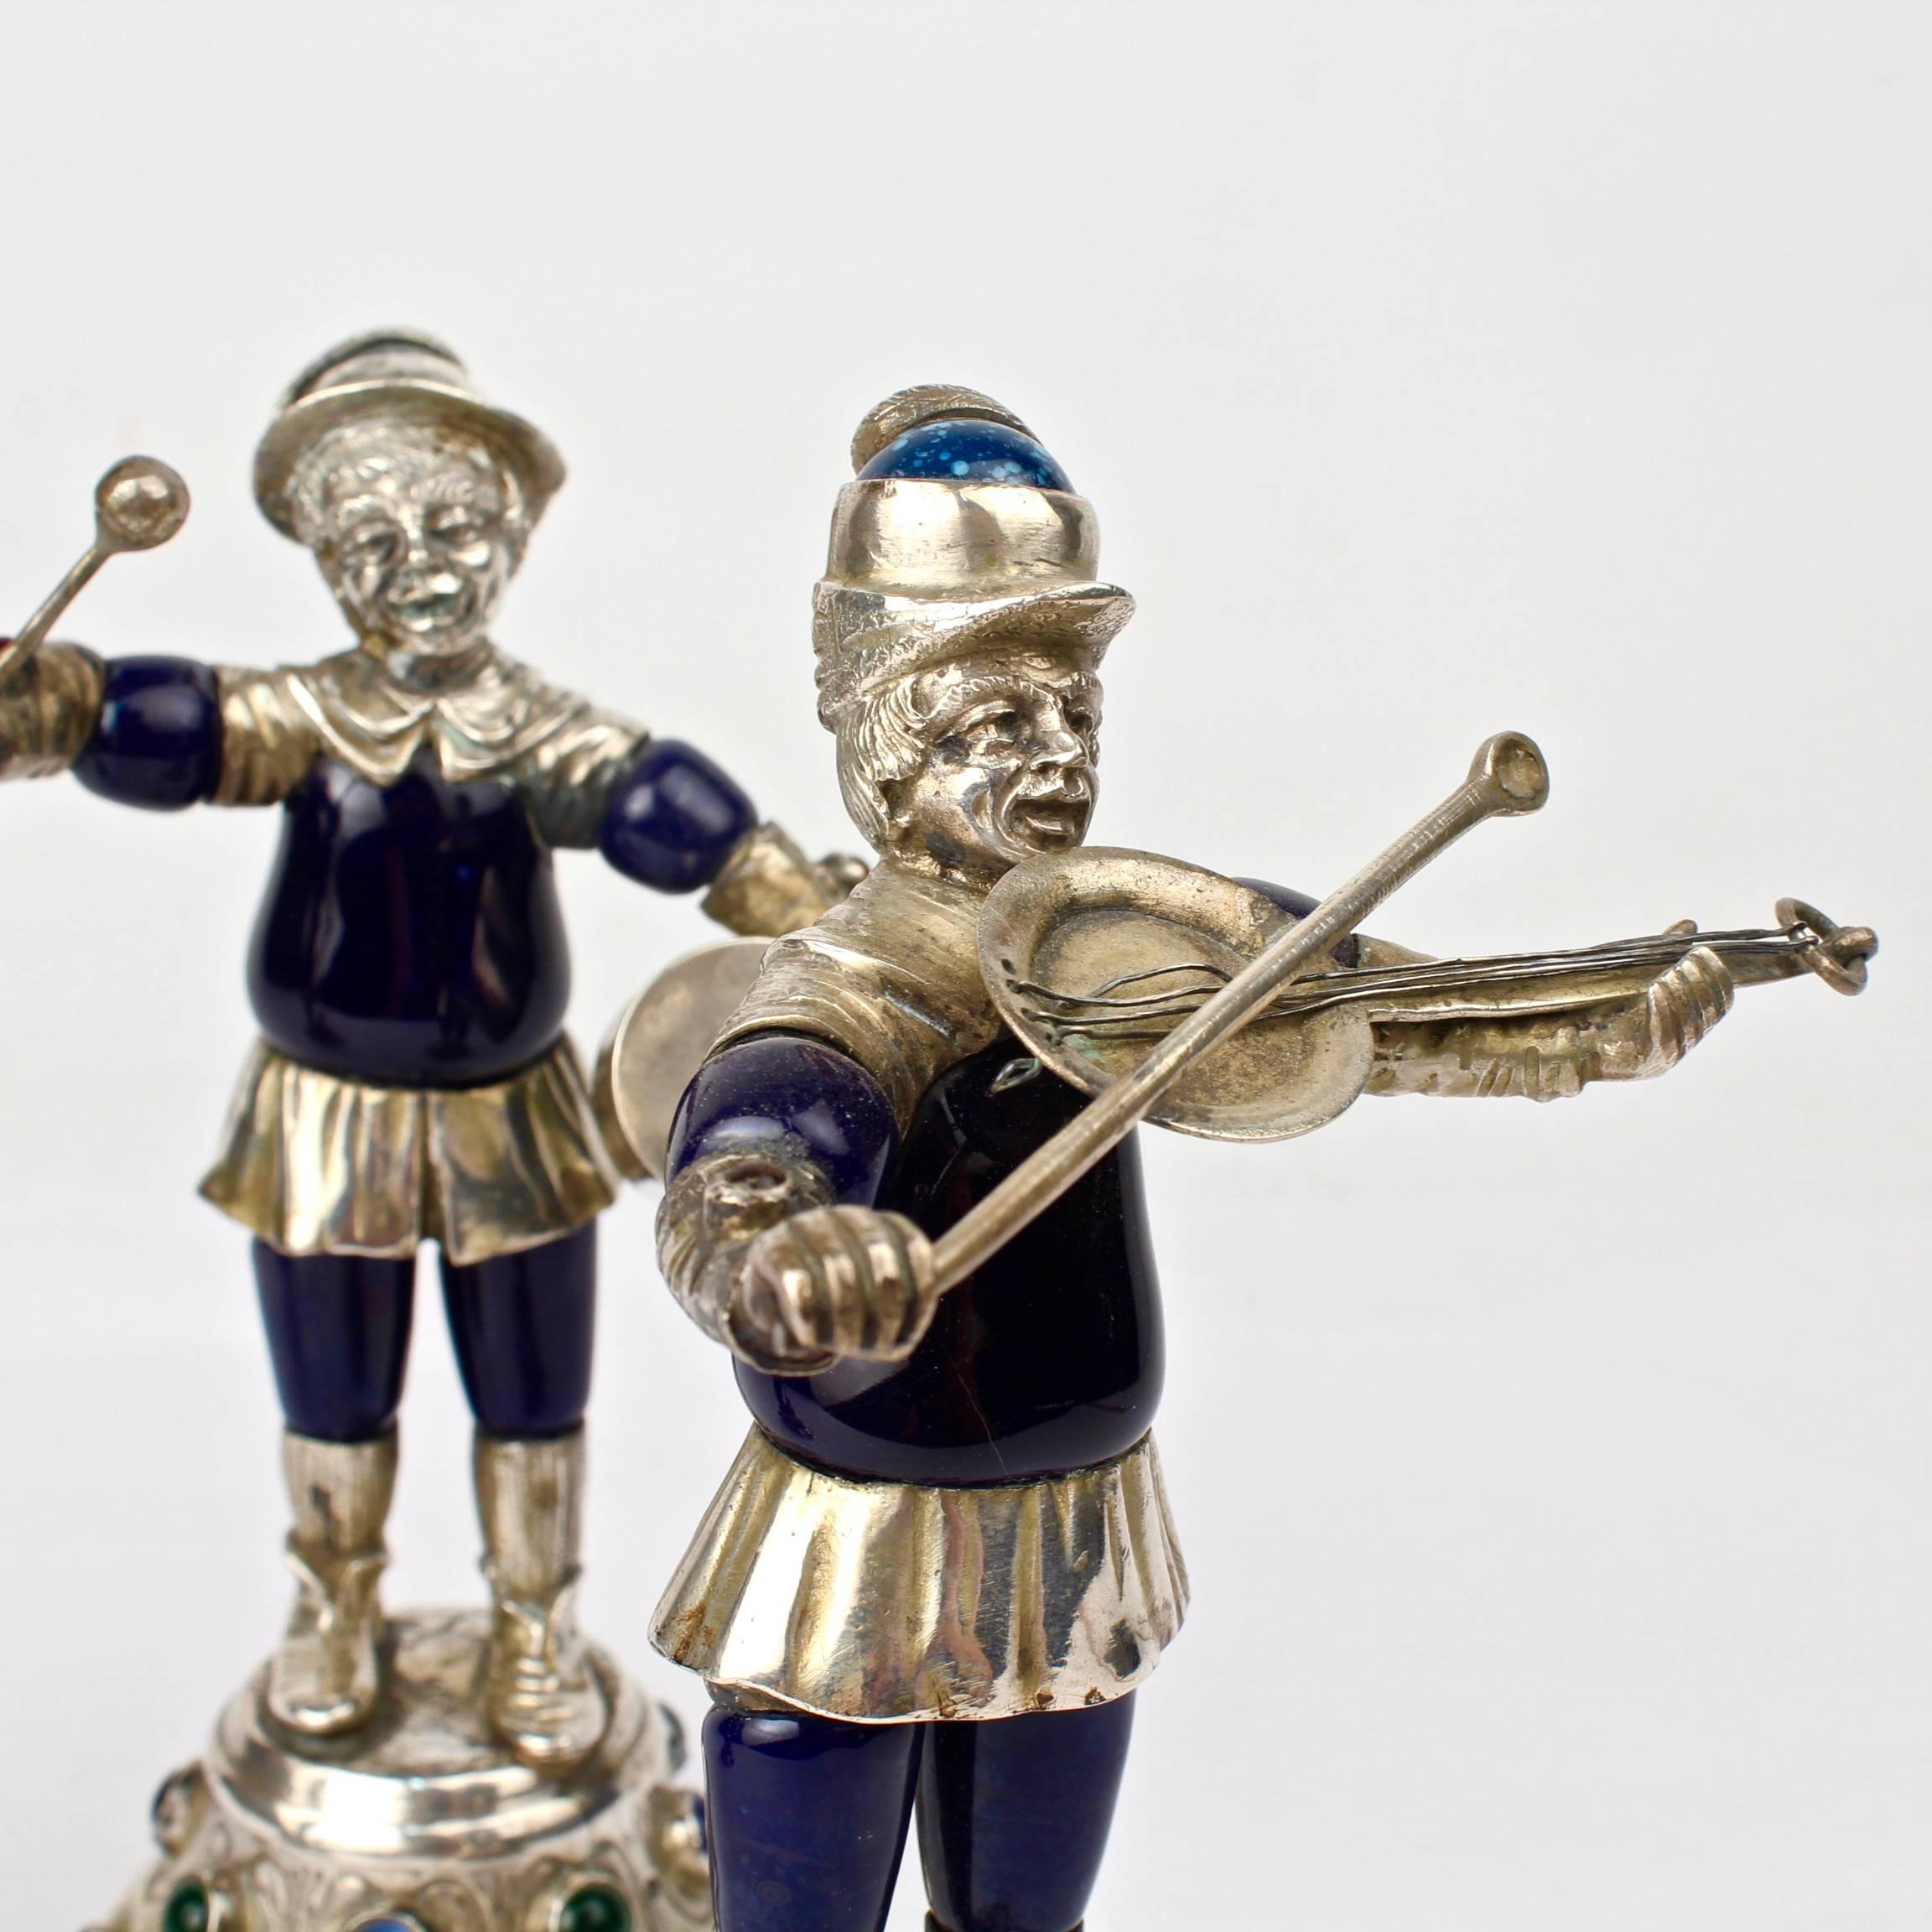 A group of three rare and terrifically whimsical German or Austrian Silver musician figures. Constructed of coin silver and enamel bodies with glass cabochon jewels to the bases.

This types of figures were coveted and widely collected in Europe